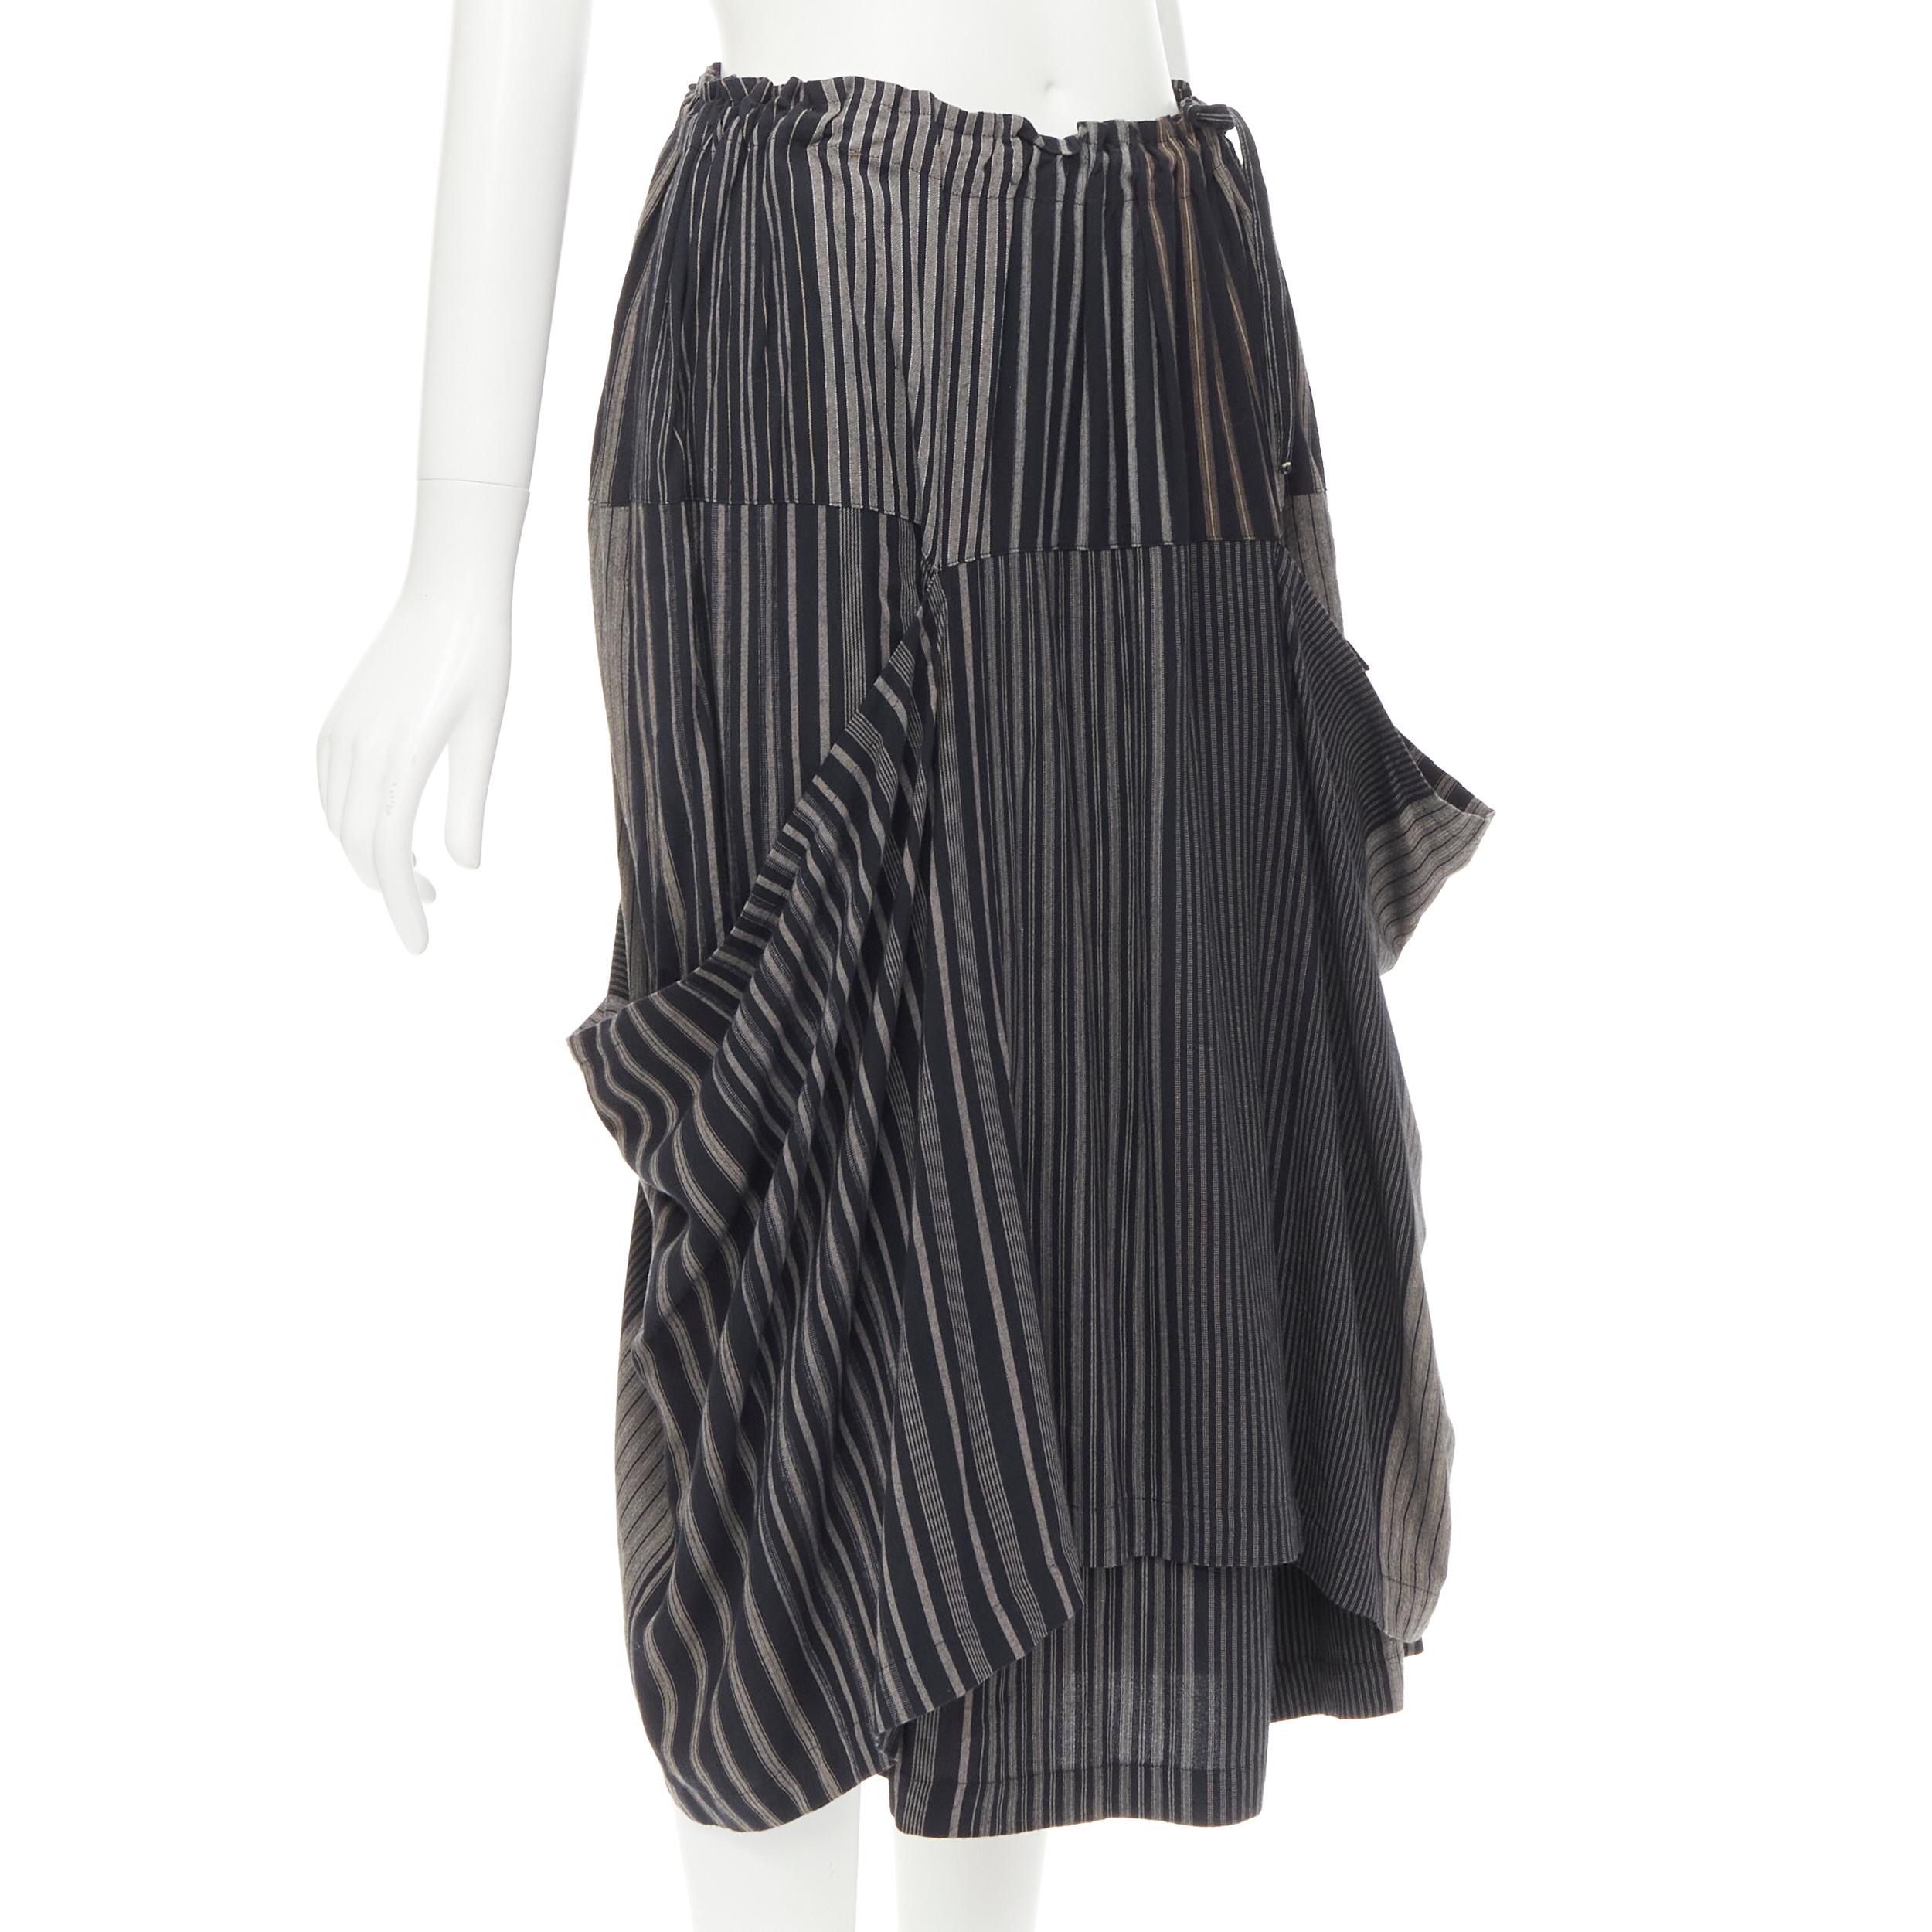 COMME DES GARCONS 1980's Vintage grey stripes deconstructed draped layered skirt 
Reference: CRTI/A00661 
Brand: Comme Des Garcons 
Designer: Rei Kawakubo 
Collection: 1980s 
Material: Cotton 
Color: Grey 
Pattern: Striped 
Extra Detail: Adjustable